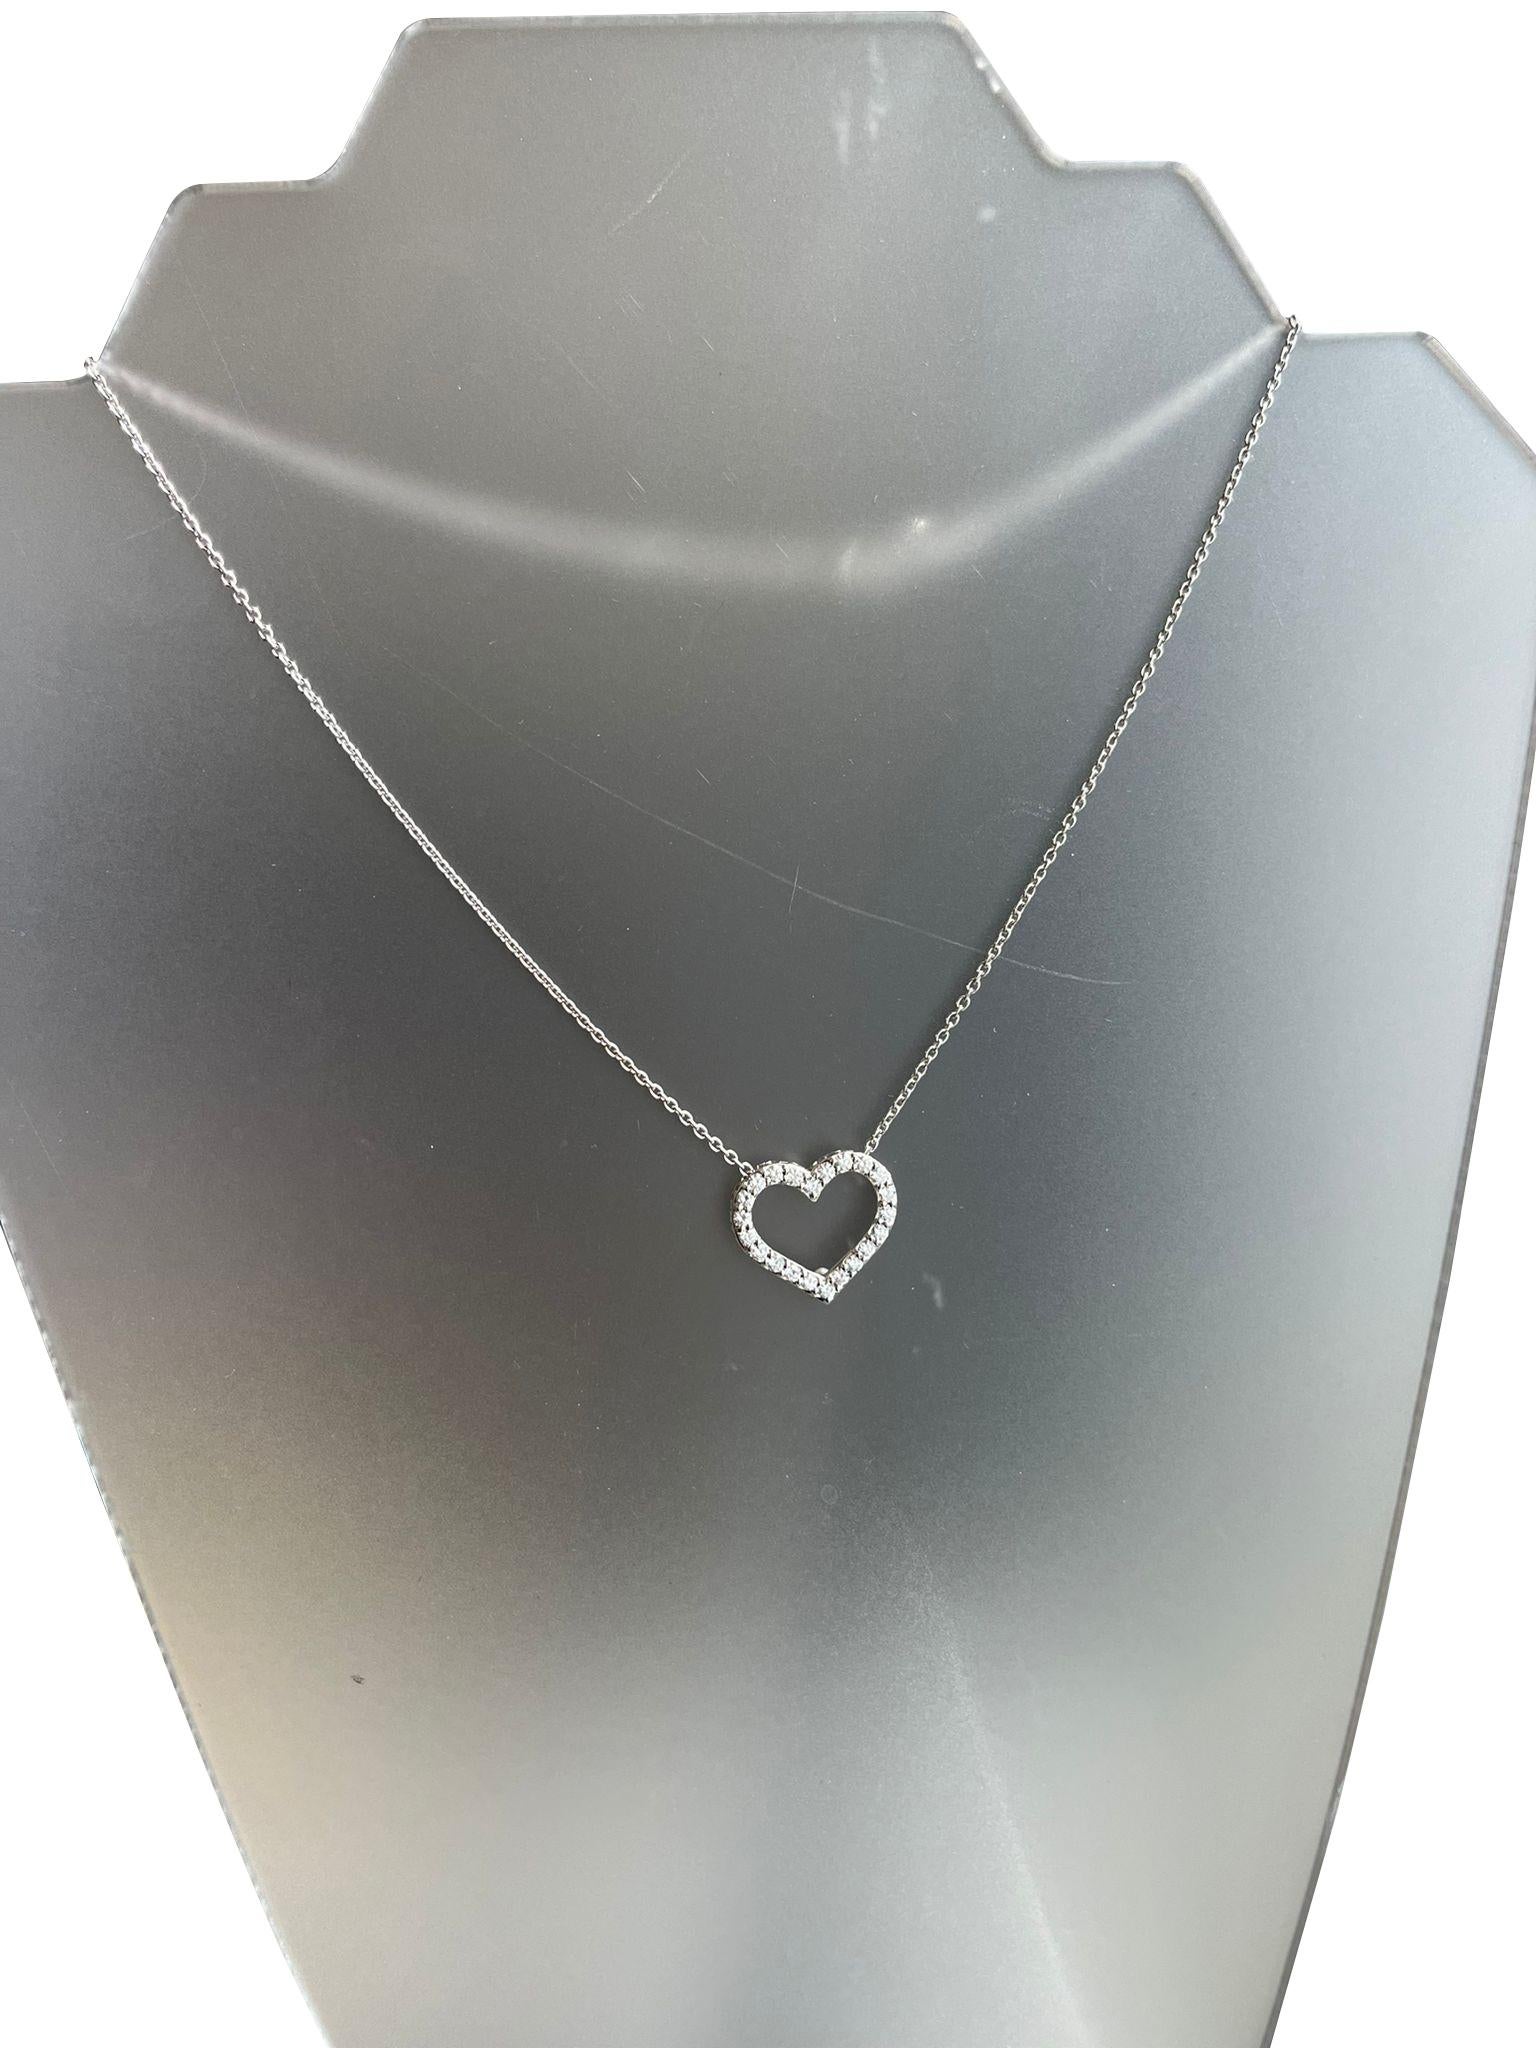 Roberto Coin 1.75ctw Vintage Open Heart Diamond Necklace Pendant 18K White Gold In Good Condition For Sale In Aventura, FL